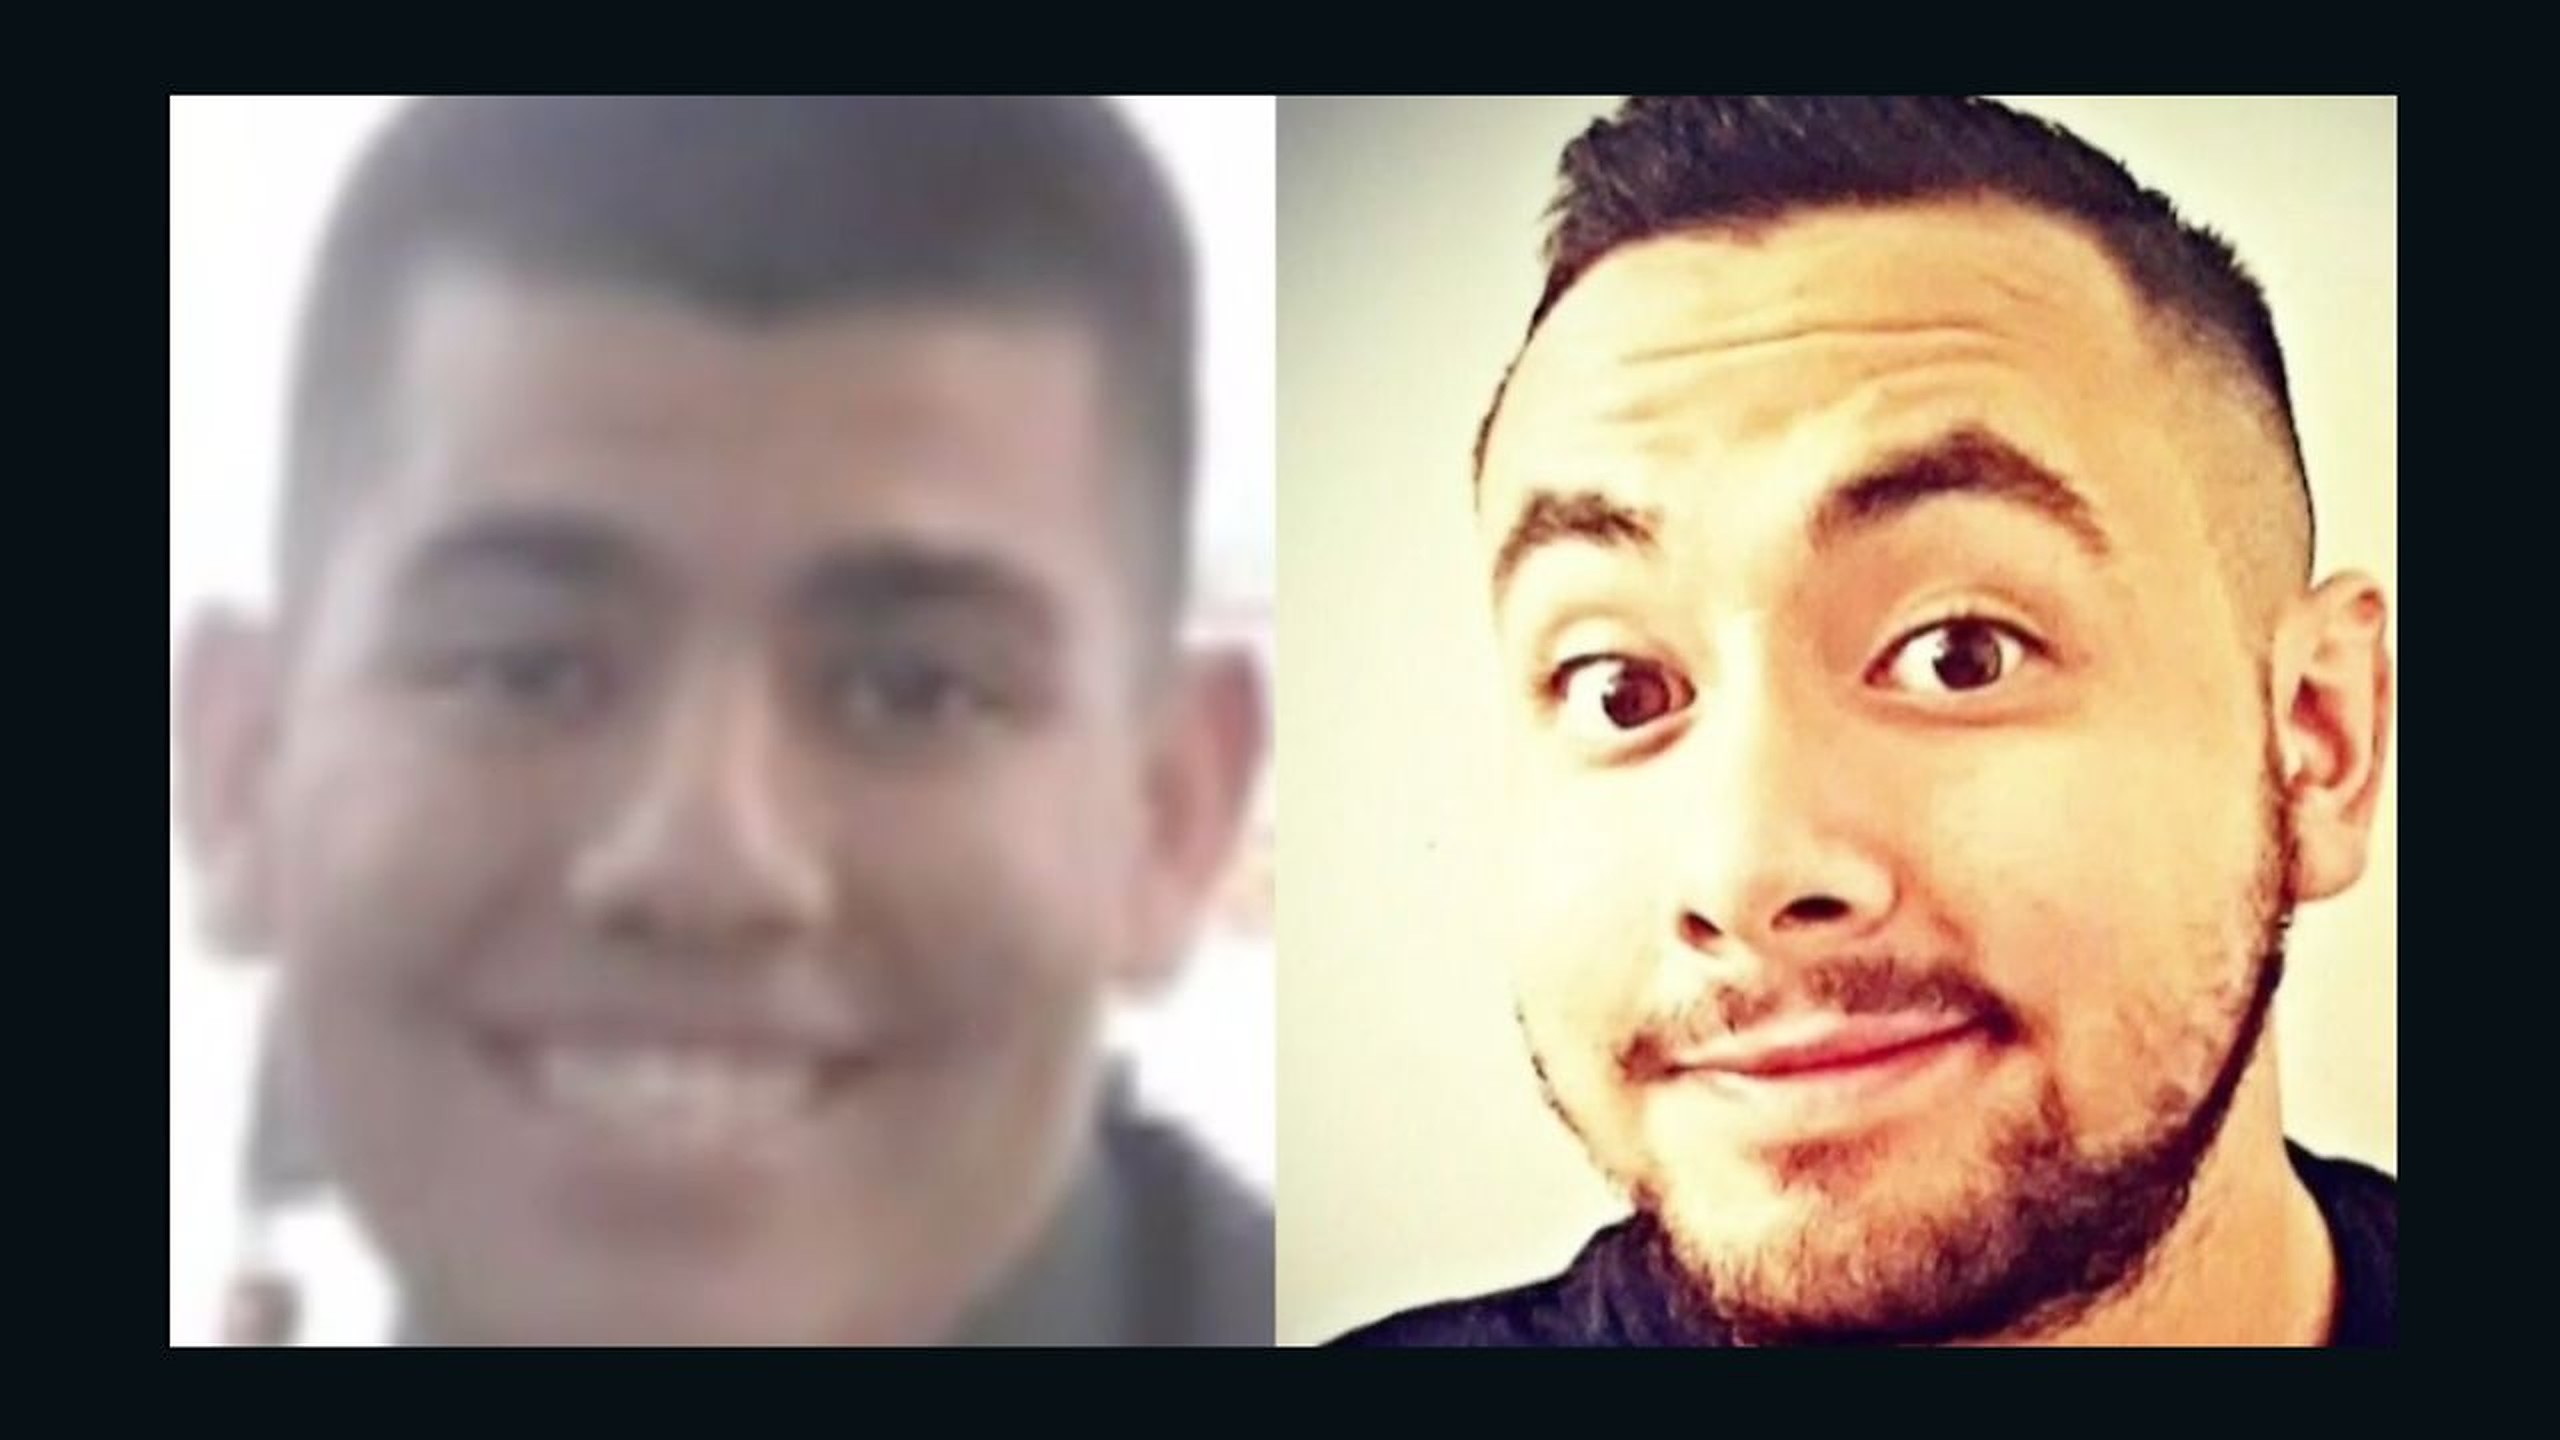 Alberto Medina and Eric Marquez: Where Are the Killers Now?